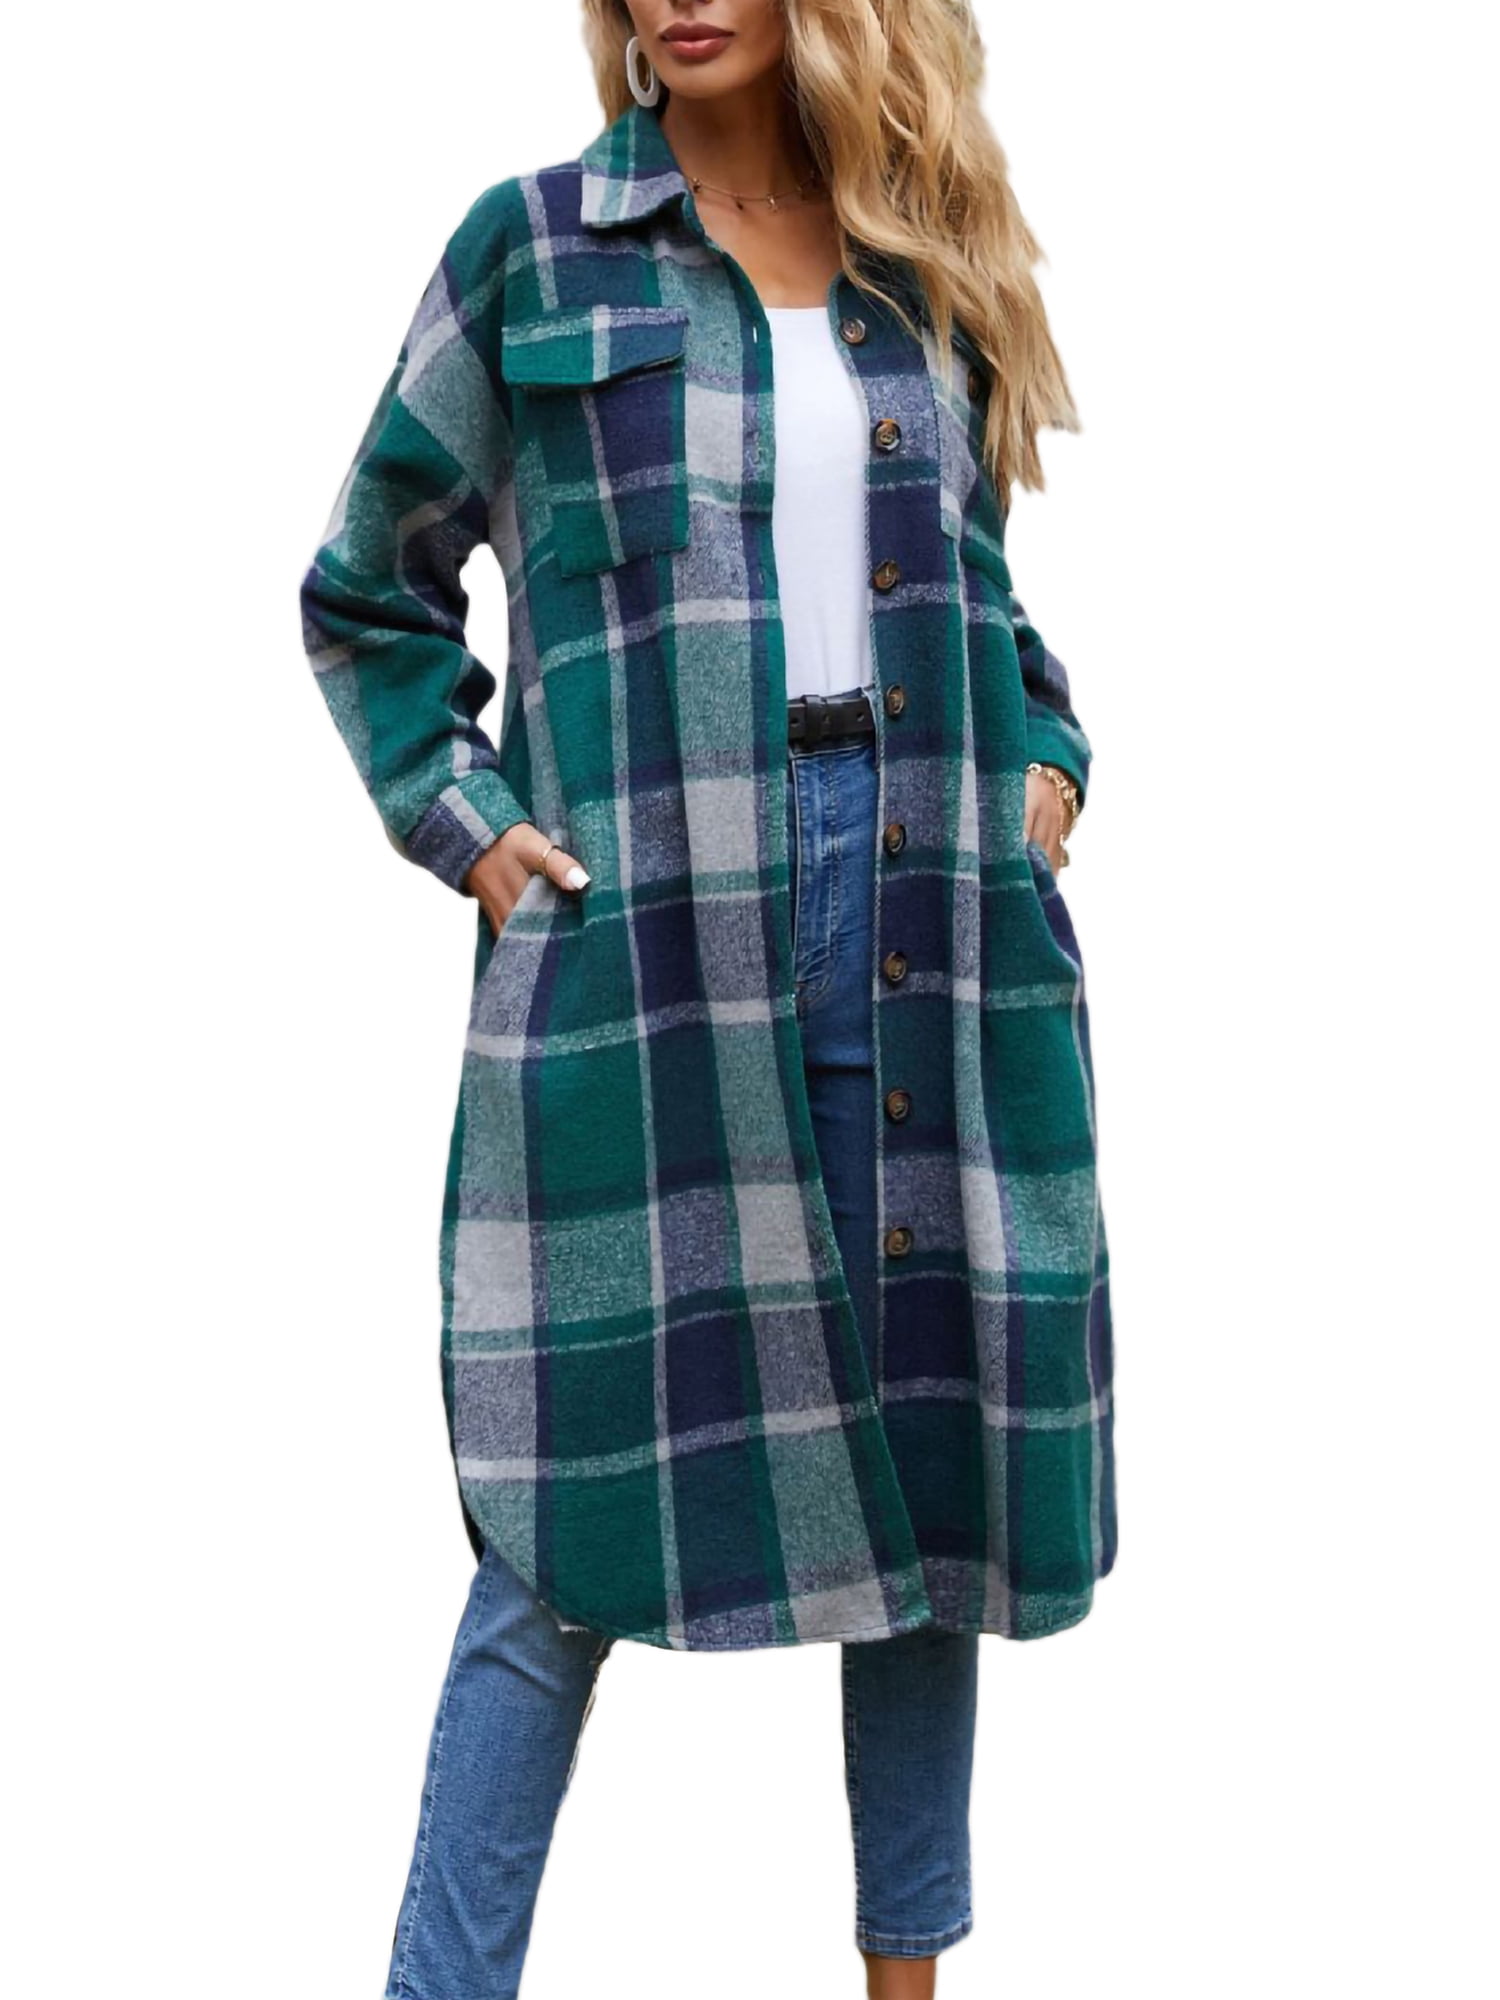 Bsubseach Long Sleeve Jacket with Pocket Plaid Color Block Buttoned Casual Shirts Outerwear 